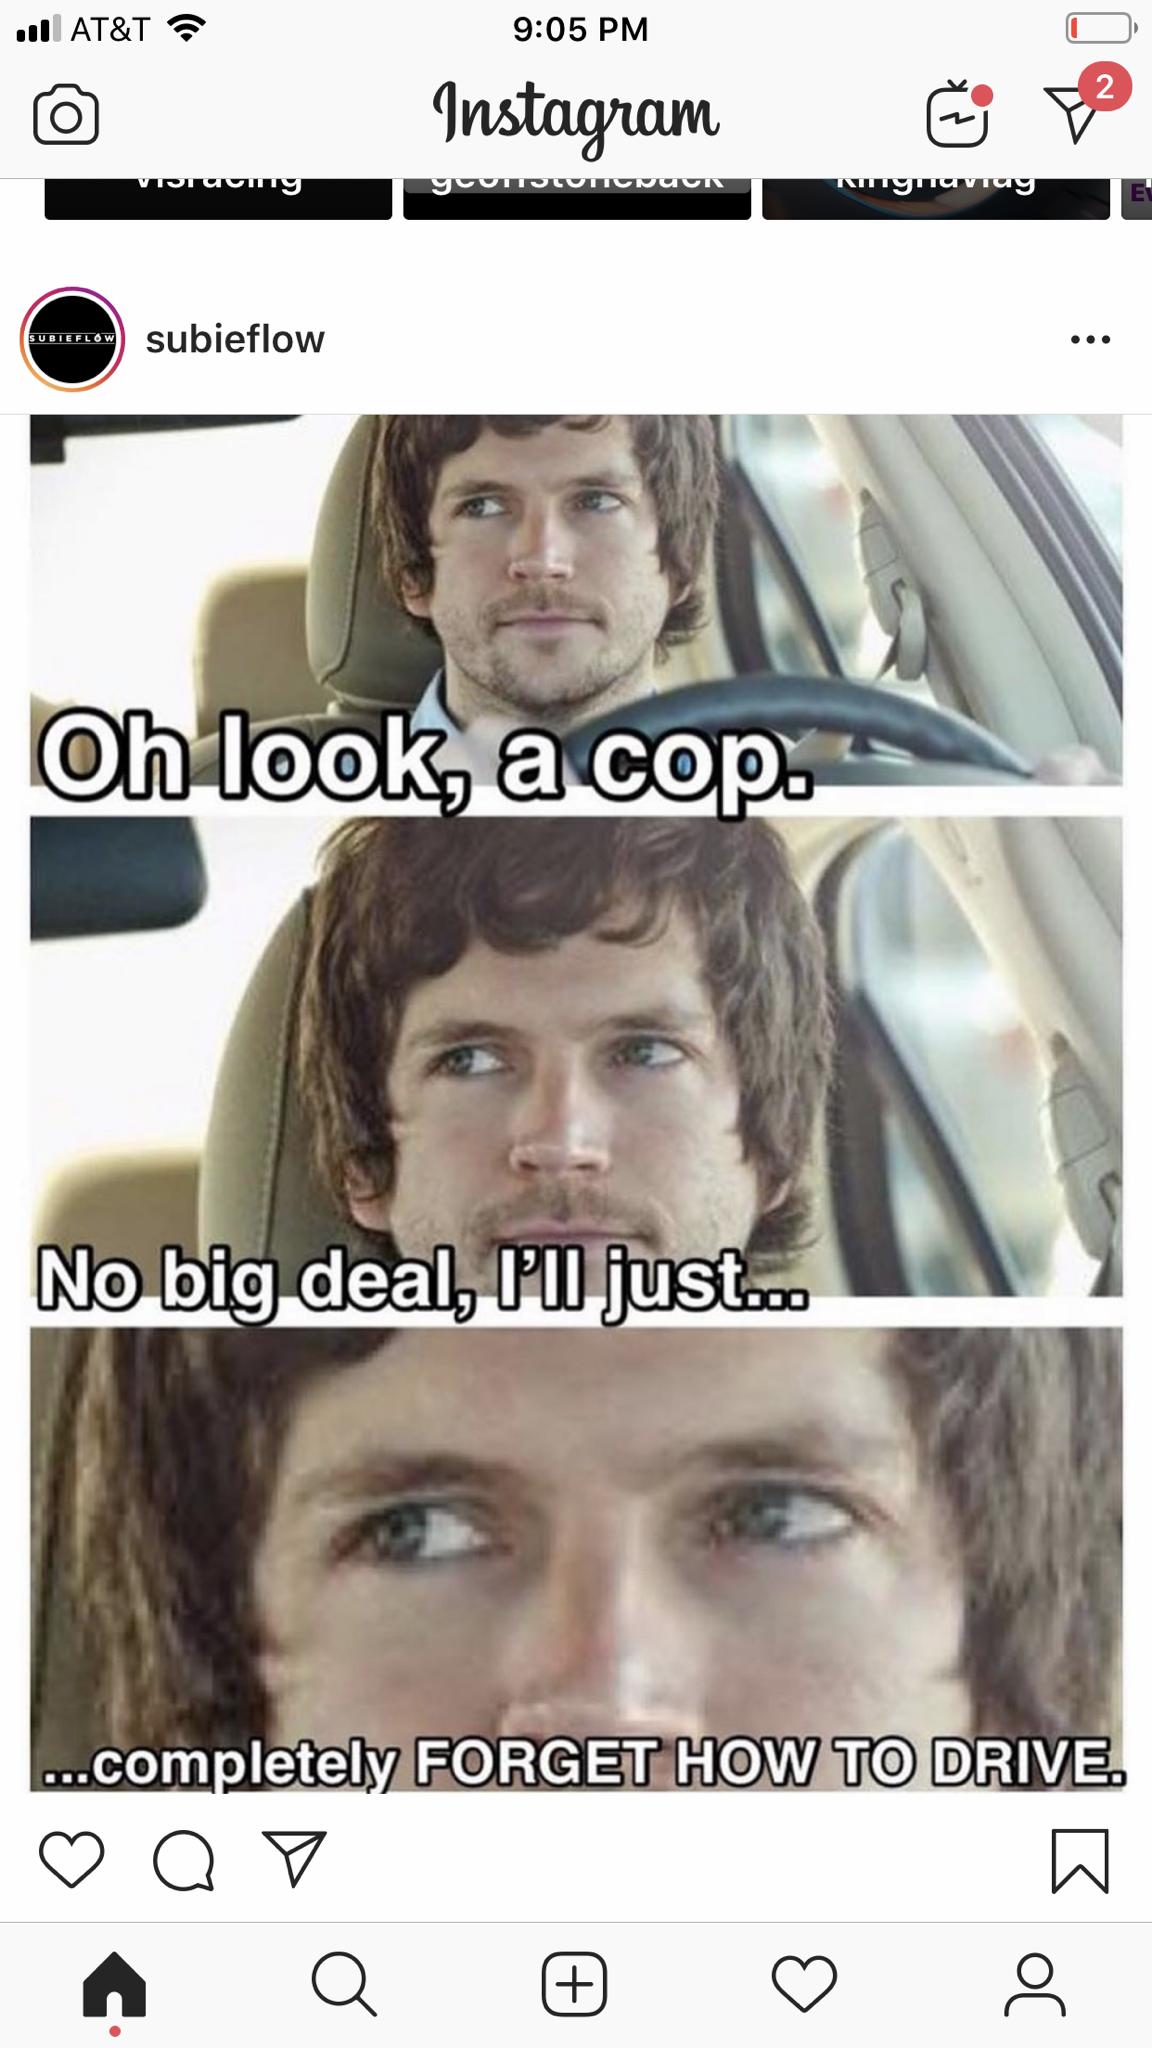 oh look a cop meme - u At&T E Instagram Vijim Tuitutivnuunt Nyuviuy Subieflow subieflow Oh look, a cop. No big deal, I'I just... ...completely Forget How To Drive. Q V W